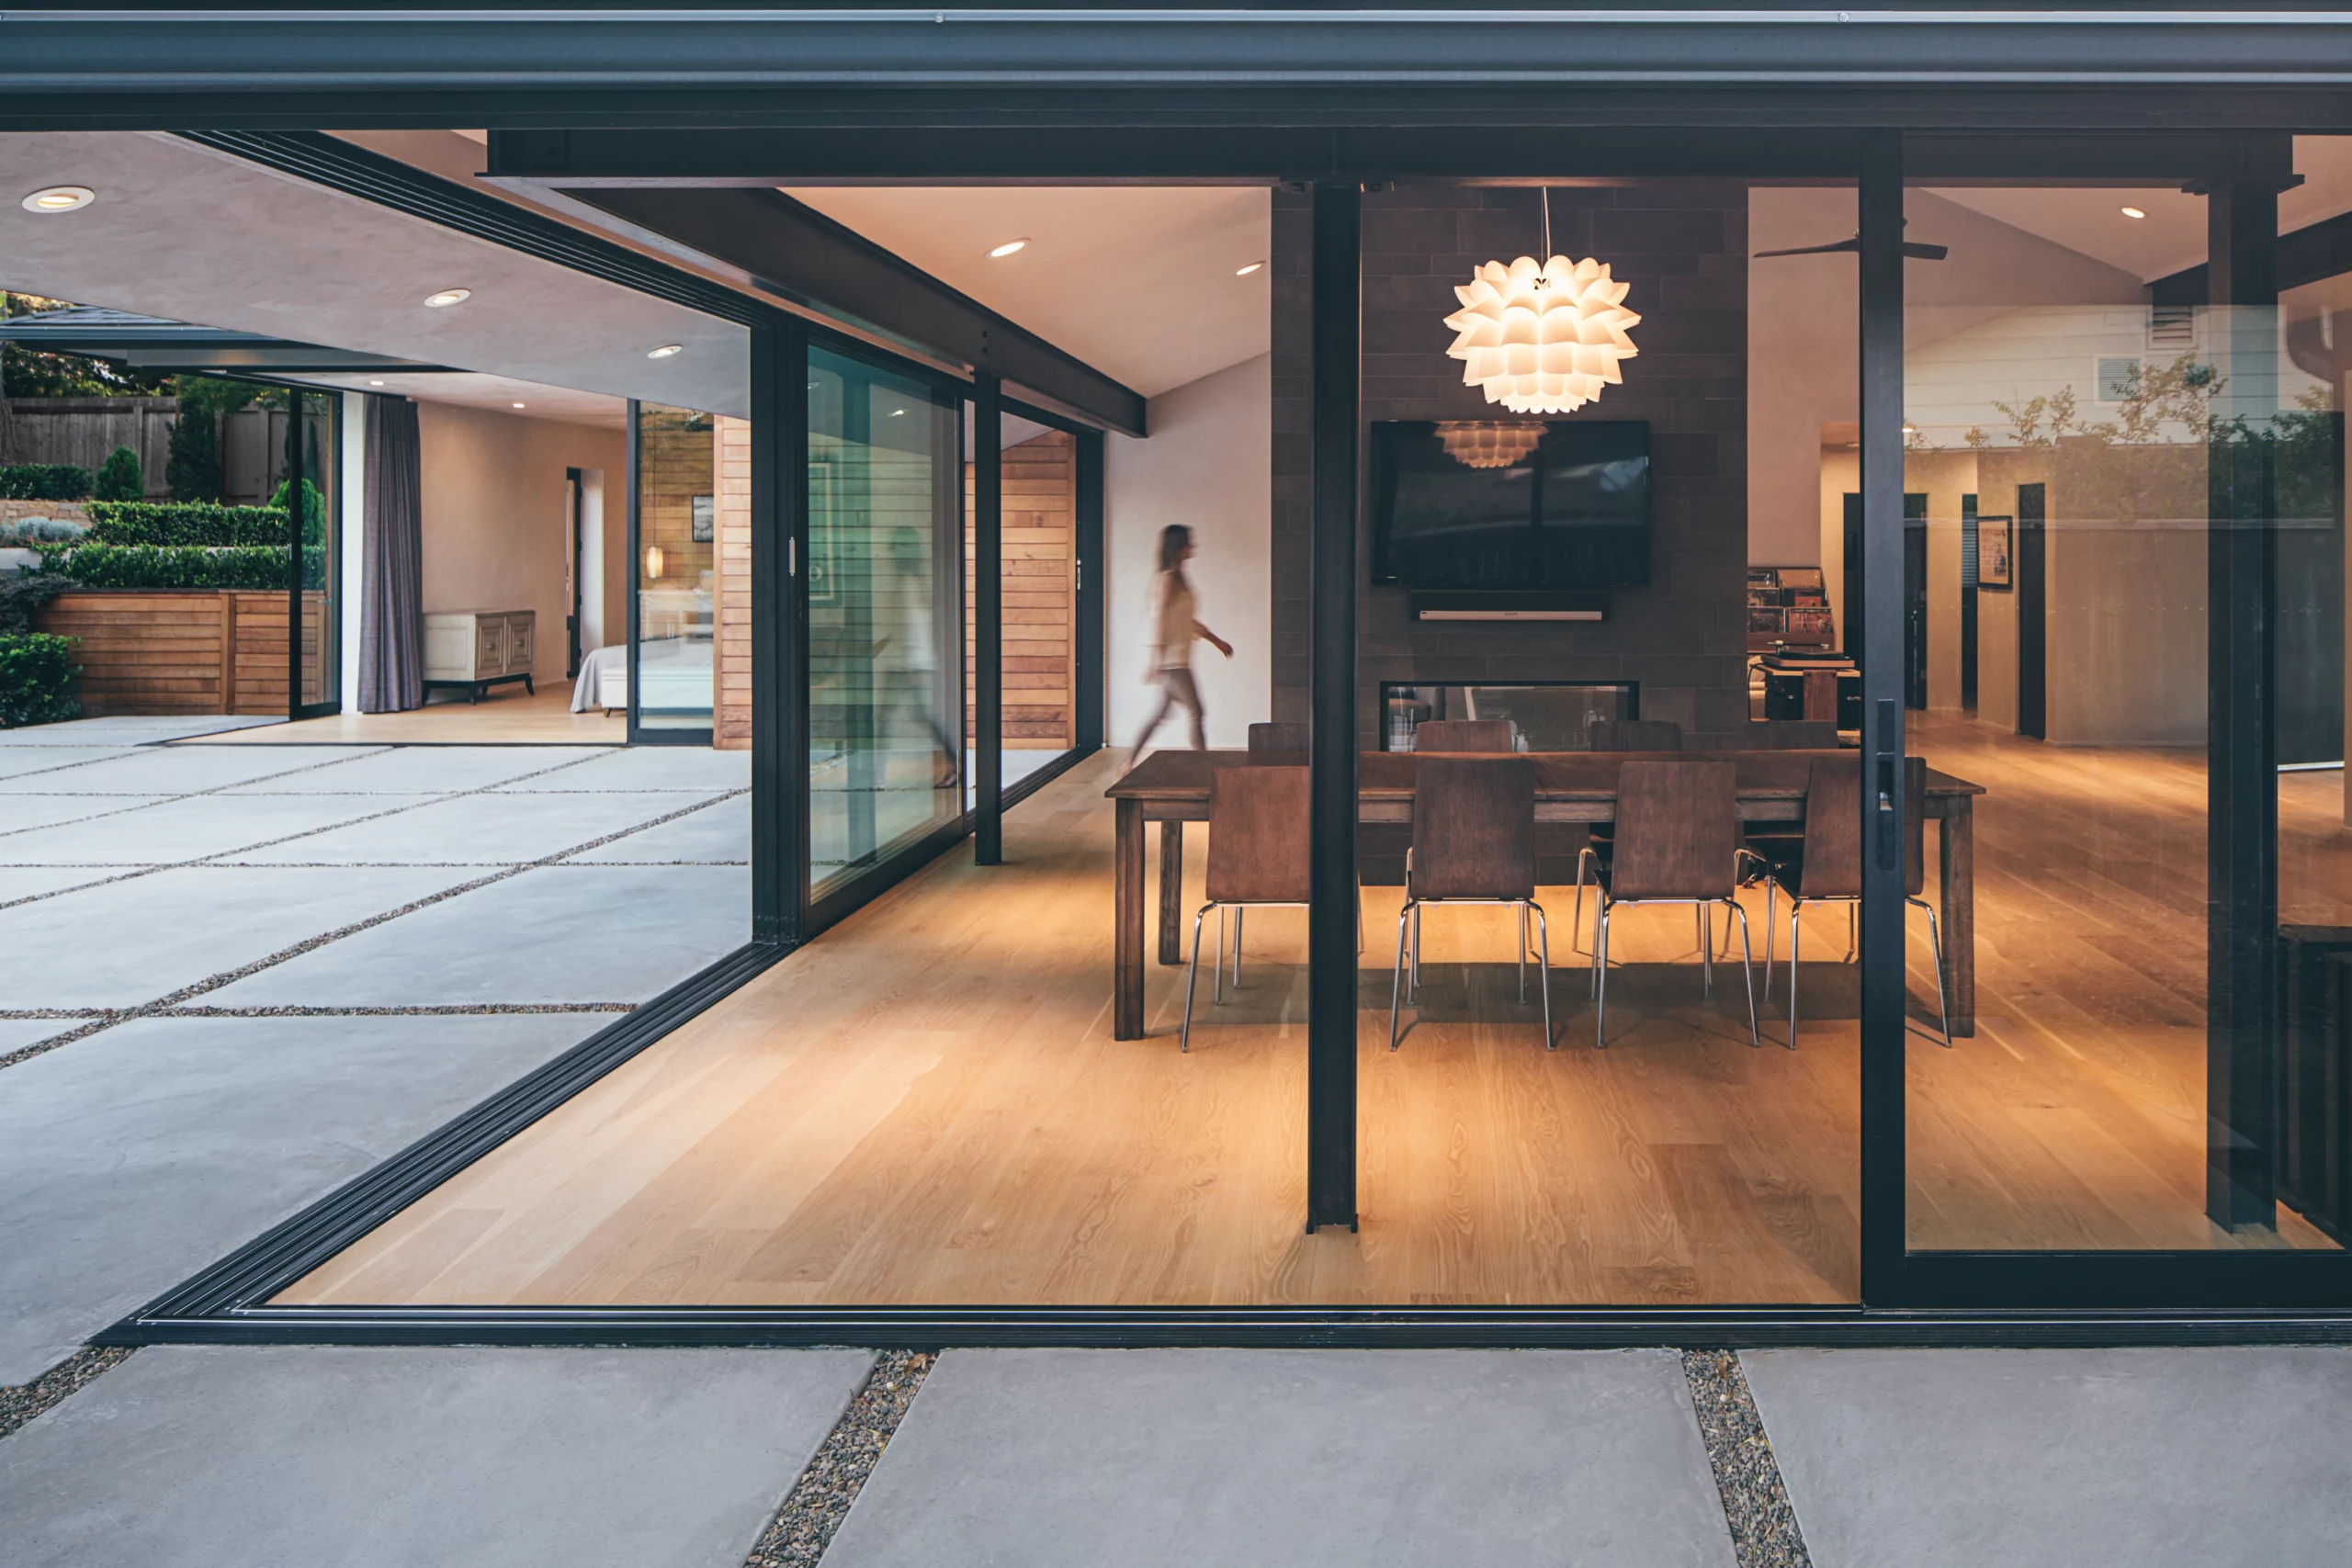 When open, the main living area's multi-slide doors let the perfect weather of Santa Barbara into the home.